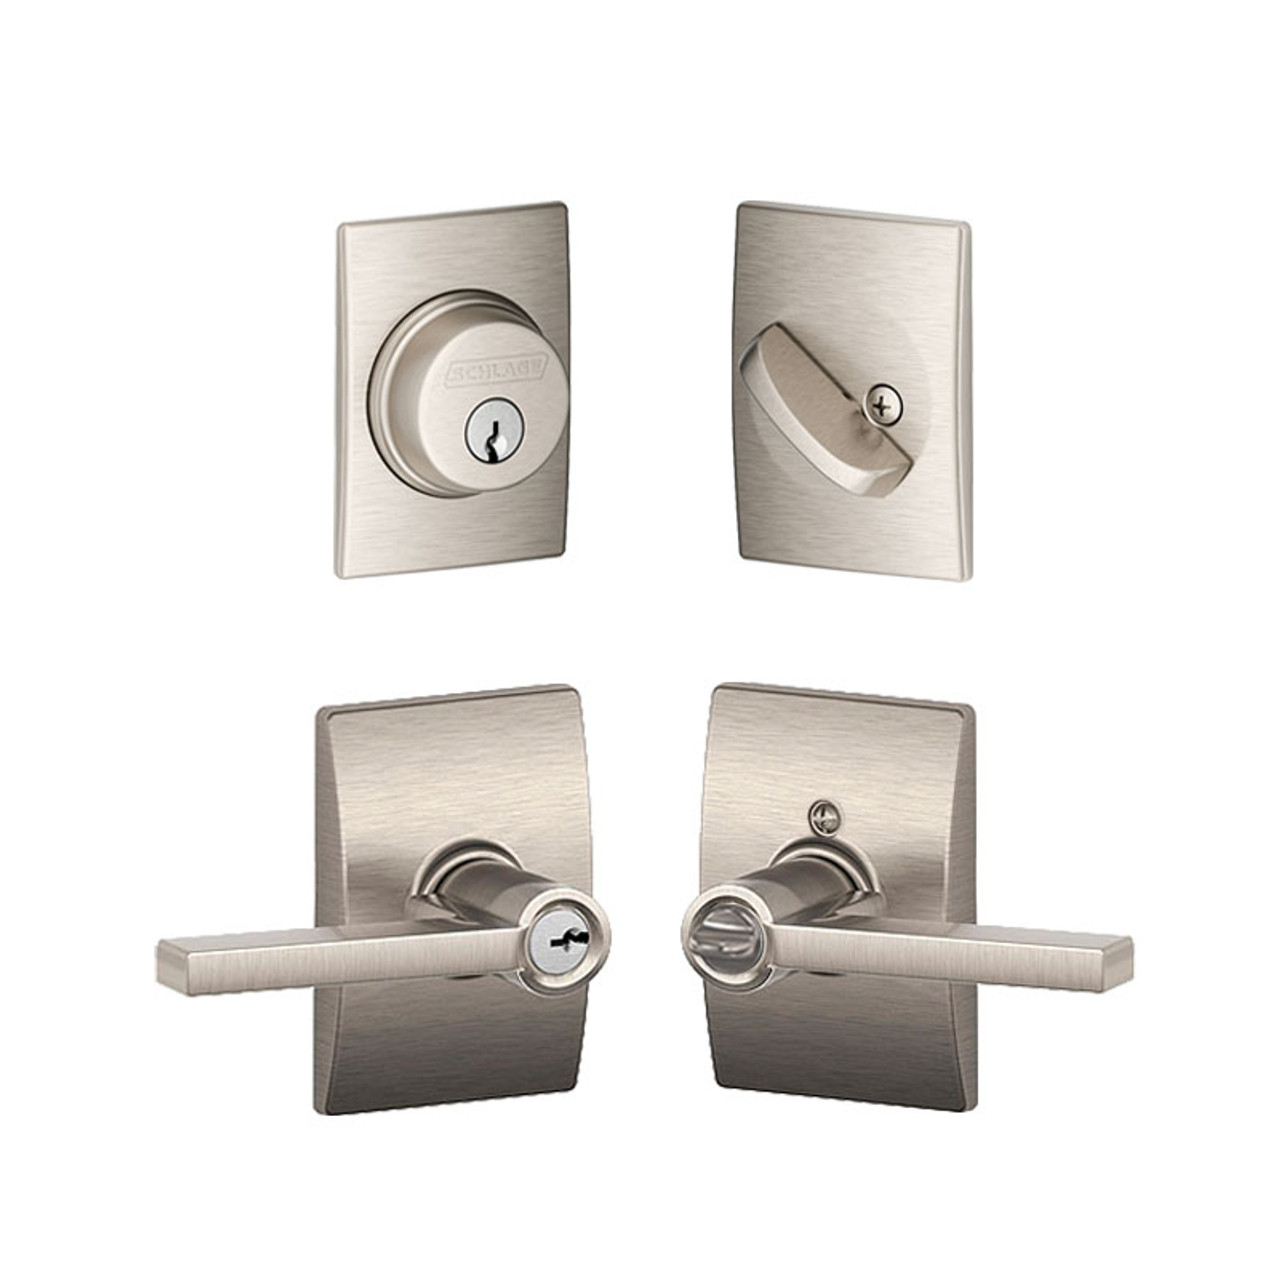 Schlage FB50N V Acc 619 B60 Single Cylinder Deadbolt and F51 Keyed Entry  Accent Lever Keyed Alike, Satin Nickel Finish, Door Levers -  Canada